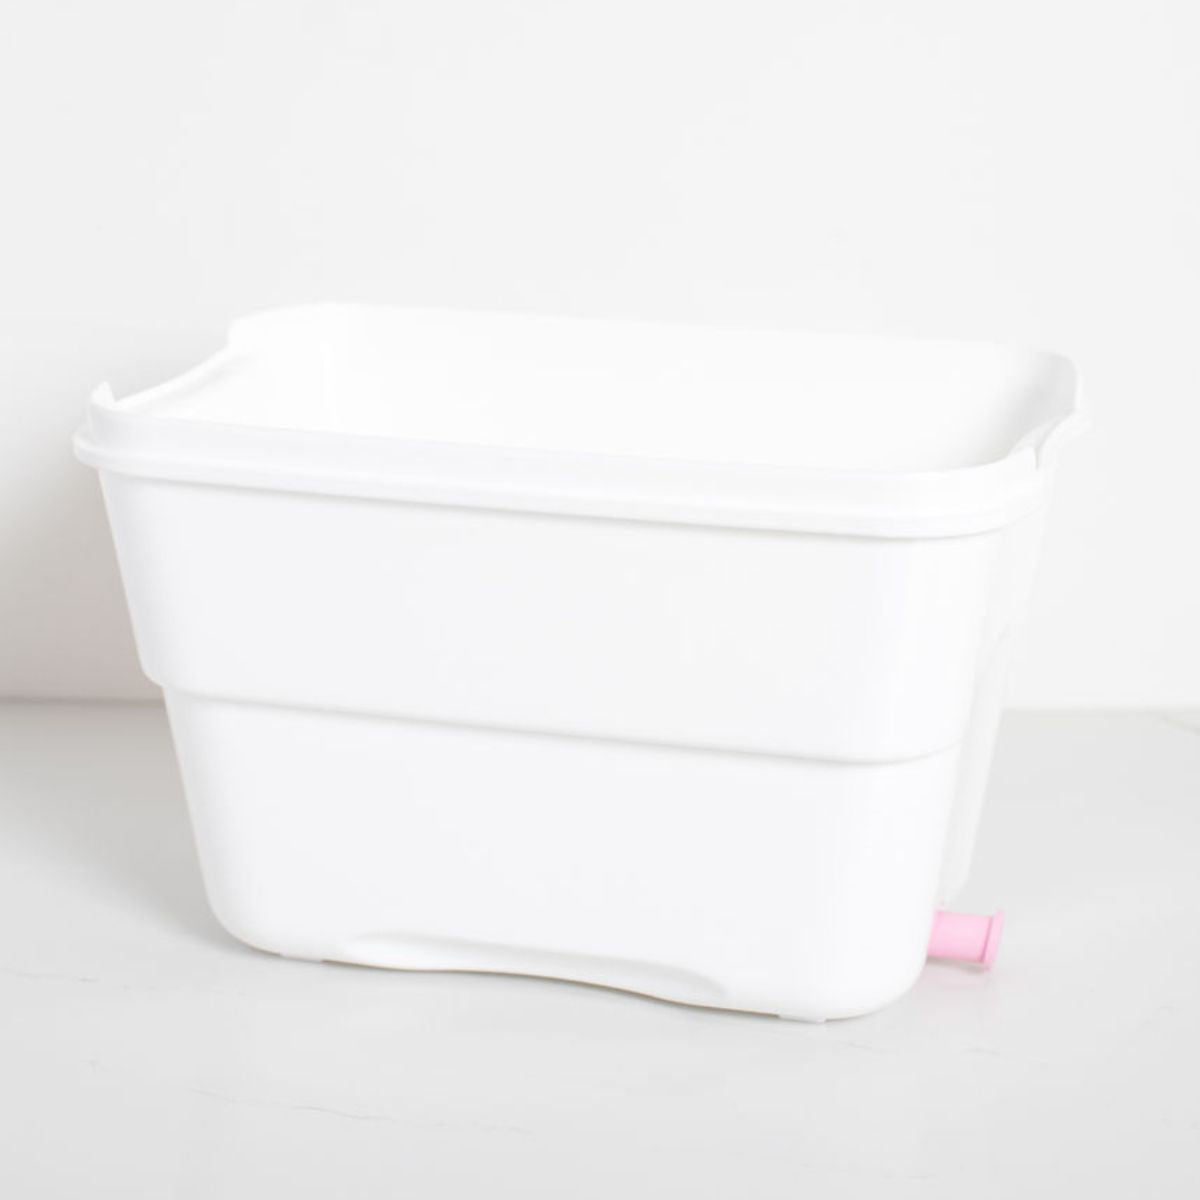 Spare Outer Container - Strucket, color_Pink